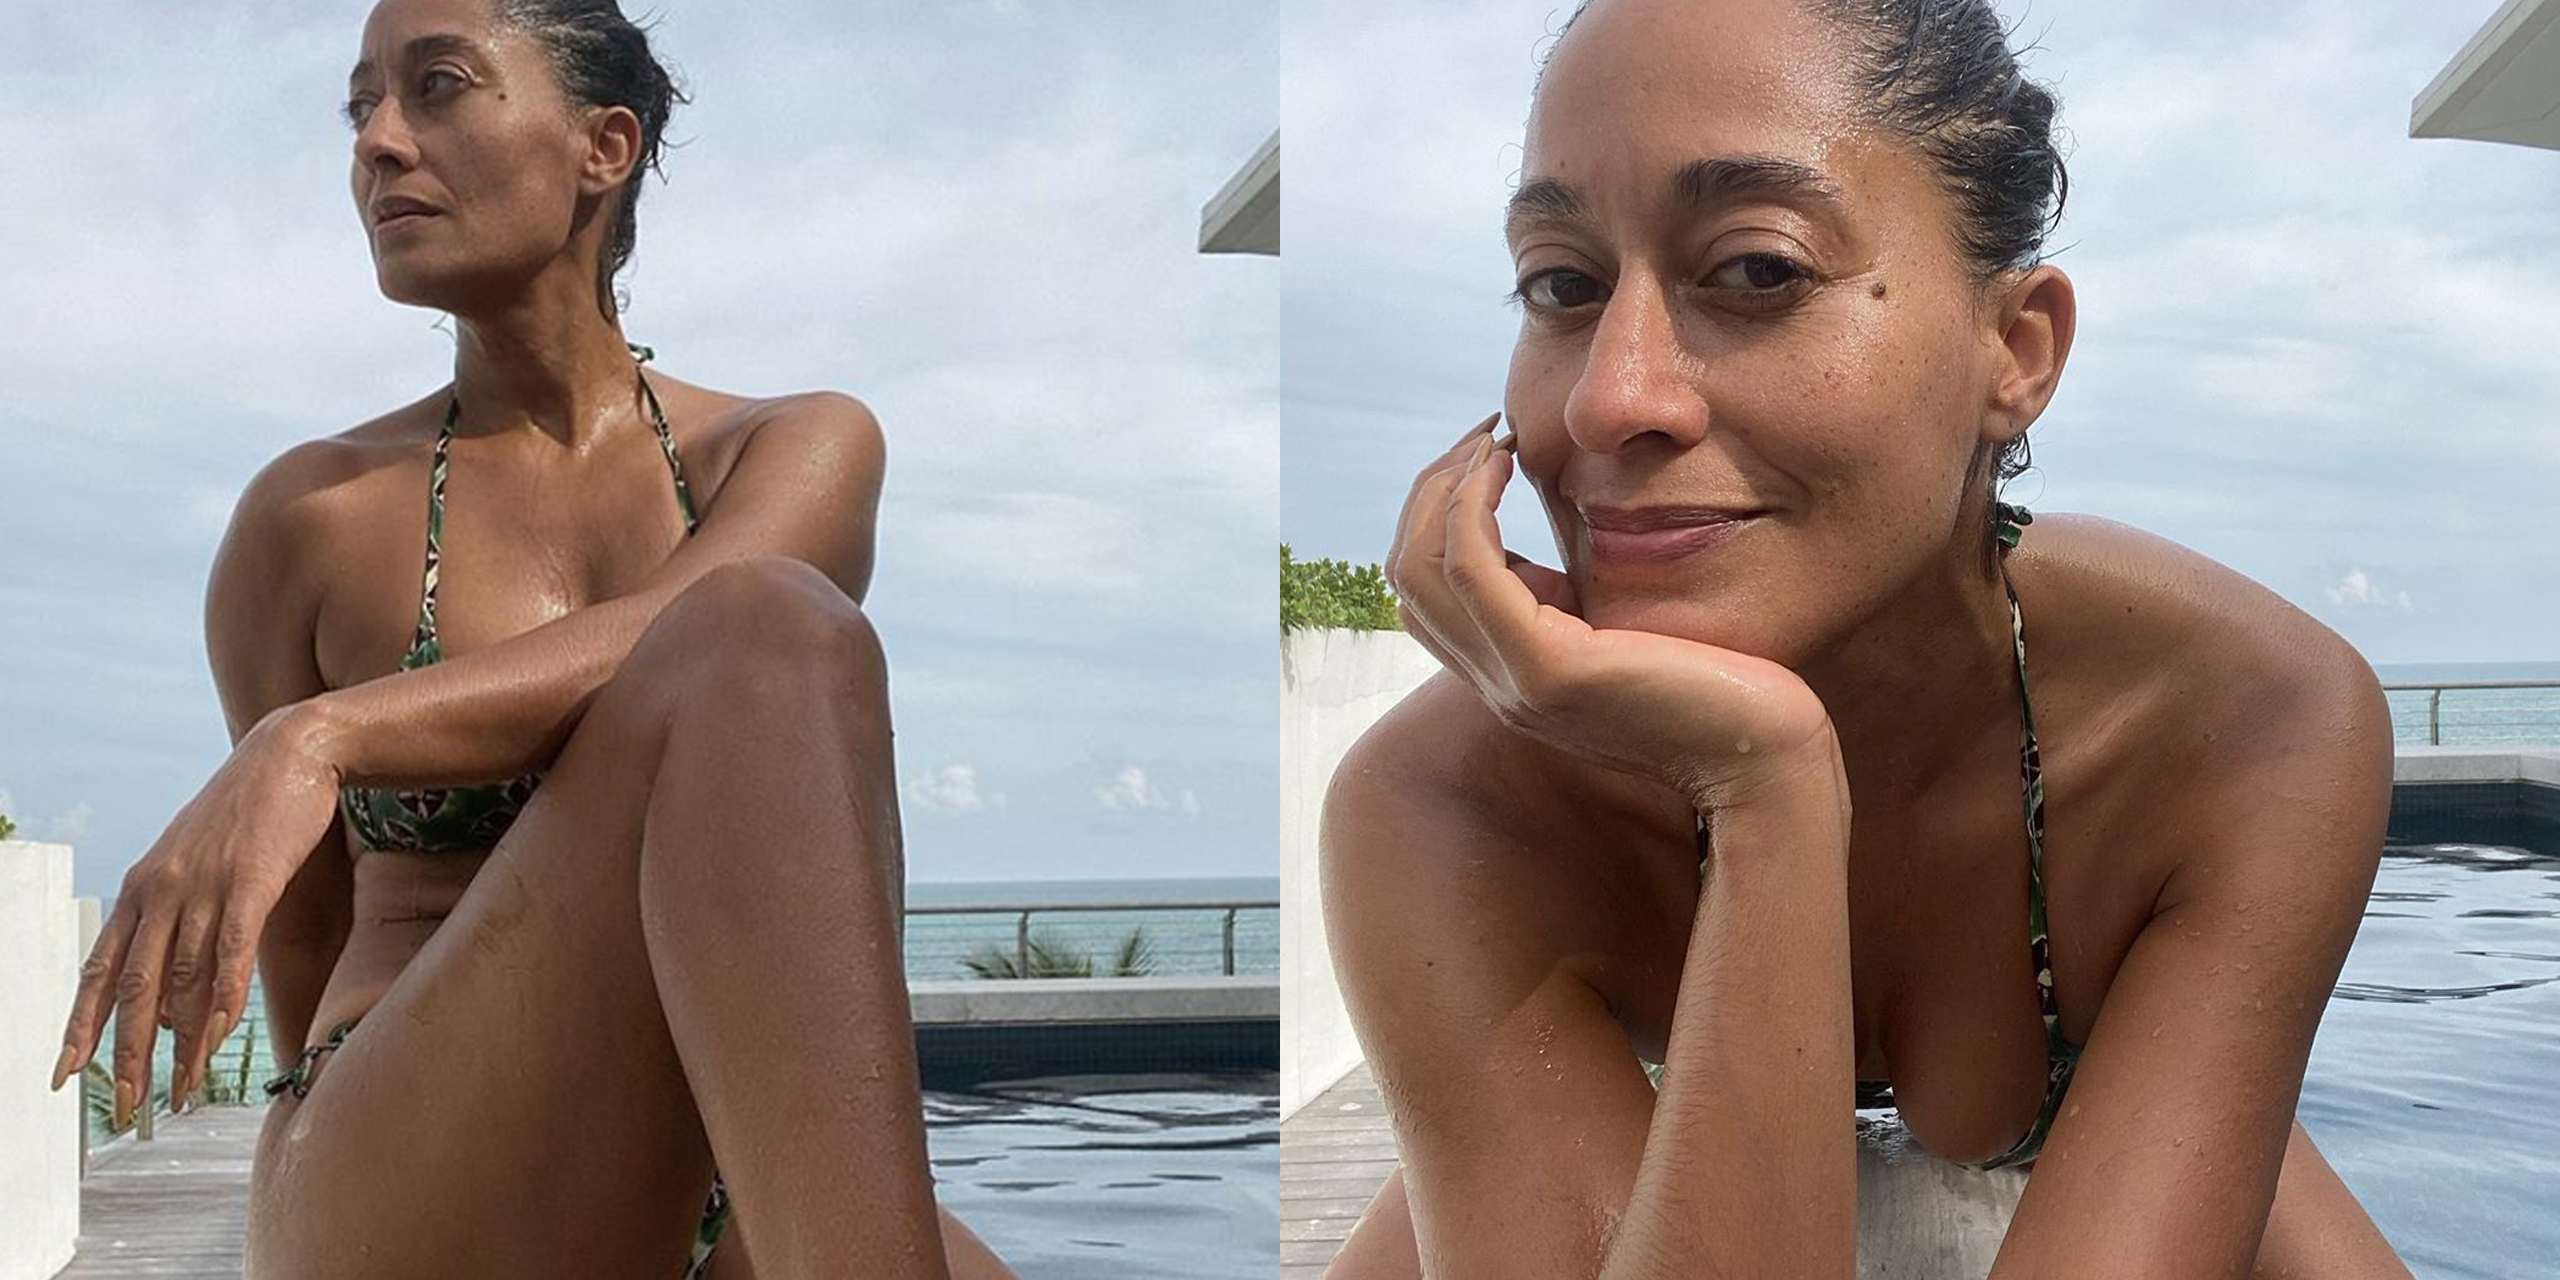 Tracee Ellis Ross Shares Unretouched Bikini Photos for 47th Birthday pic